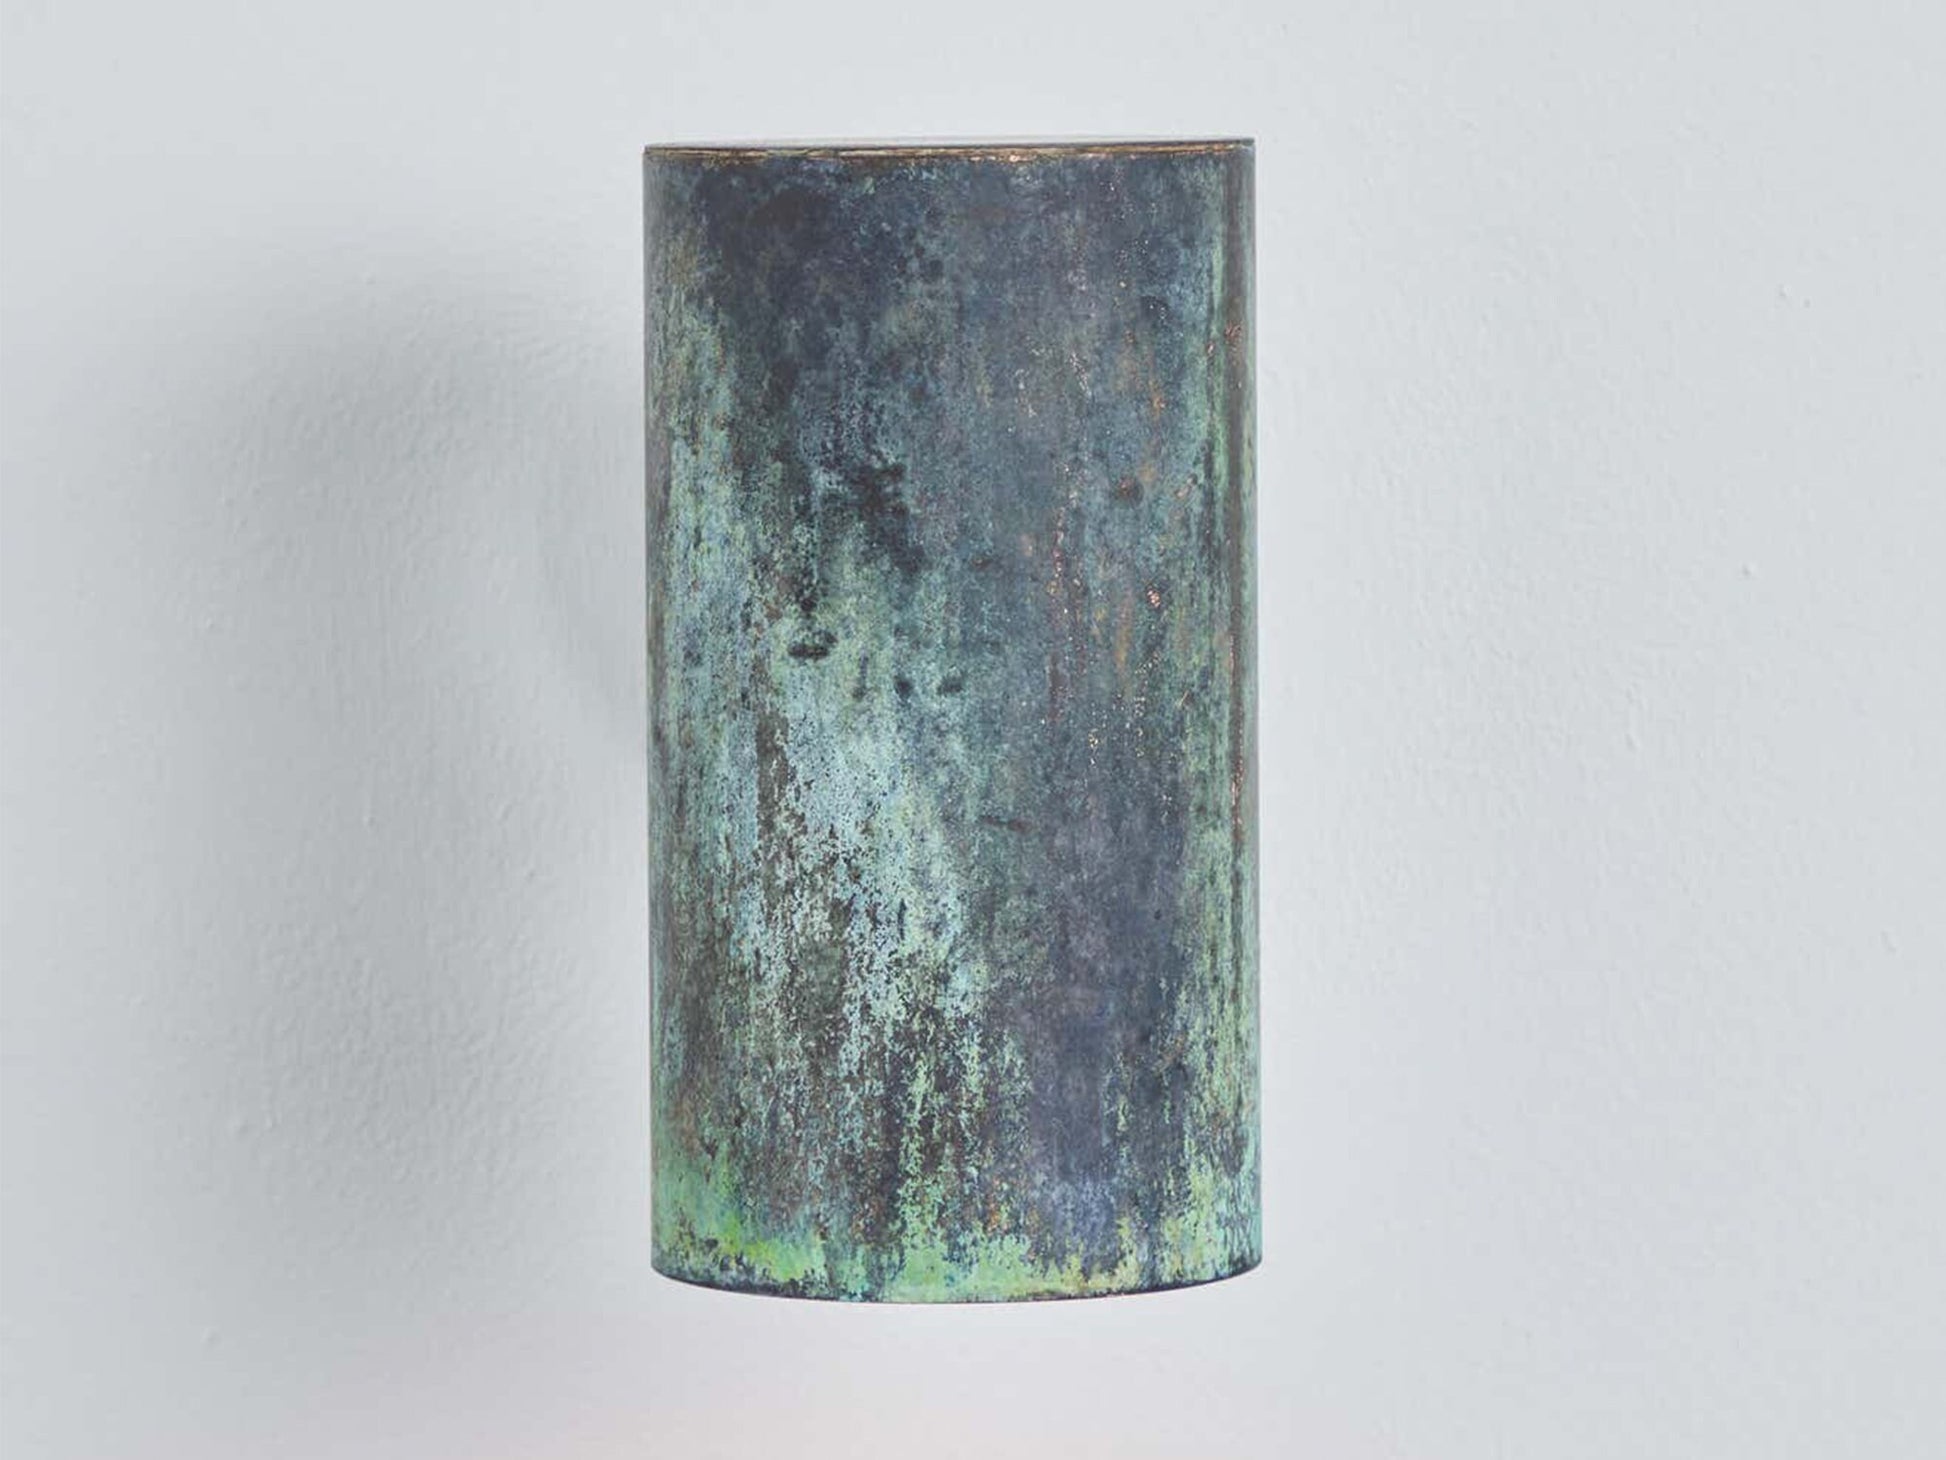 Rustic Tubular Shape Wall Lights with Captivating Glow